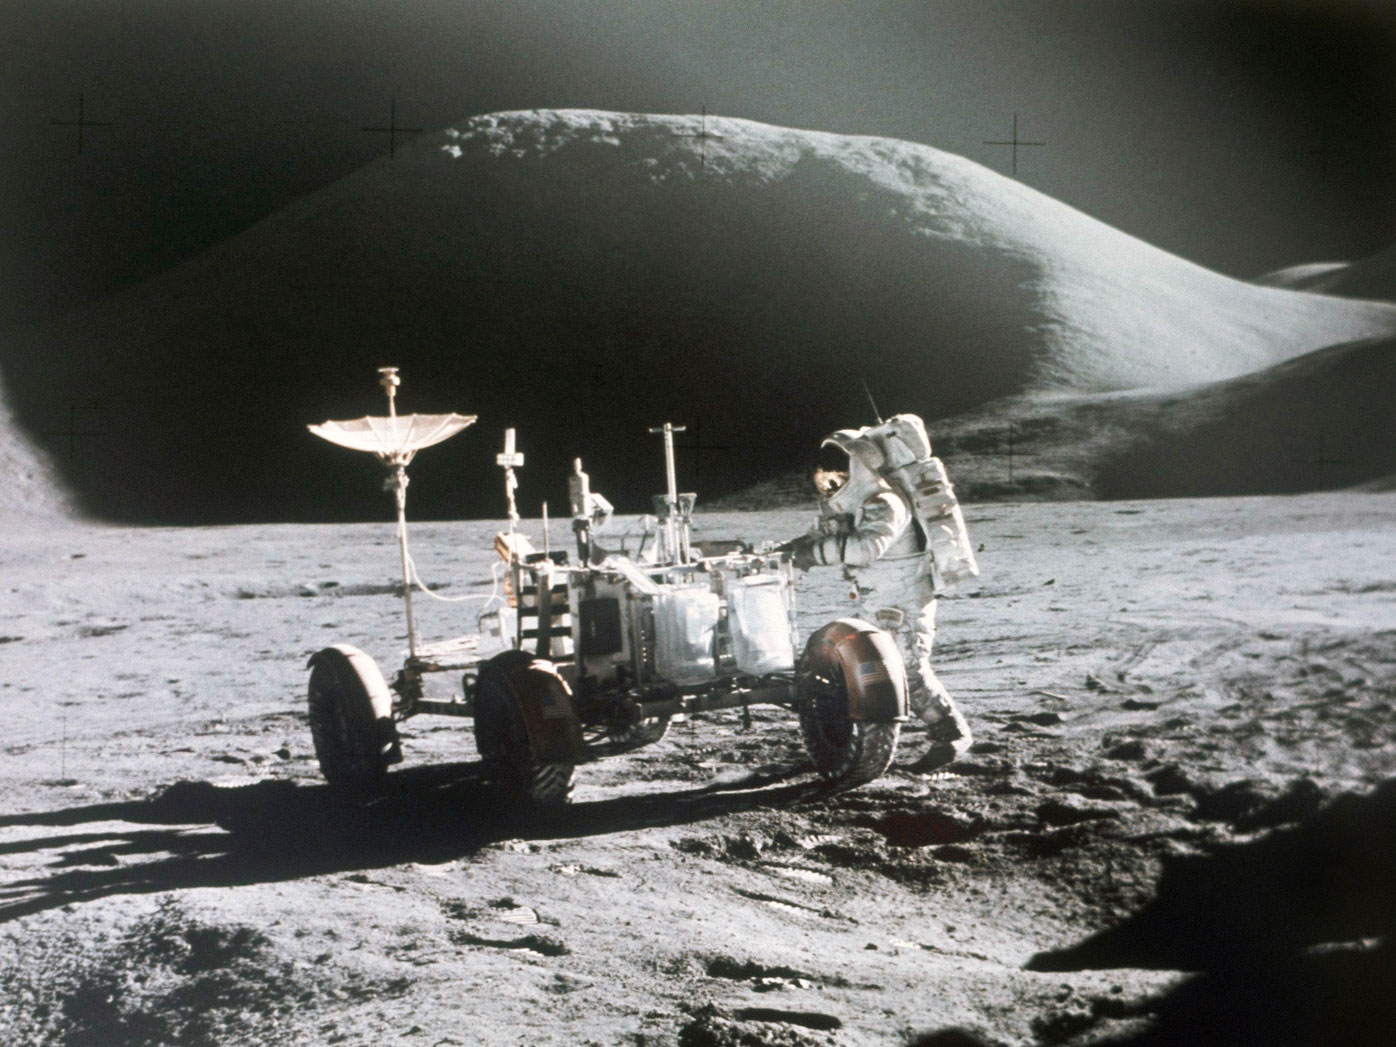 NASA astronaut James Irwin stands next to a rover on the surface of the moon in 1971.